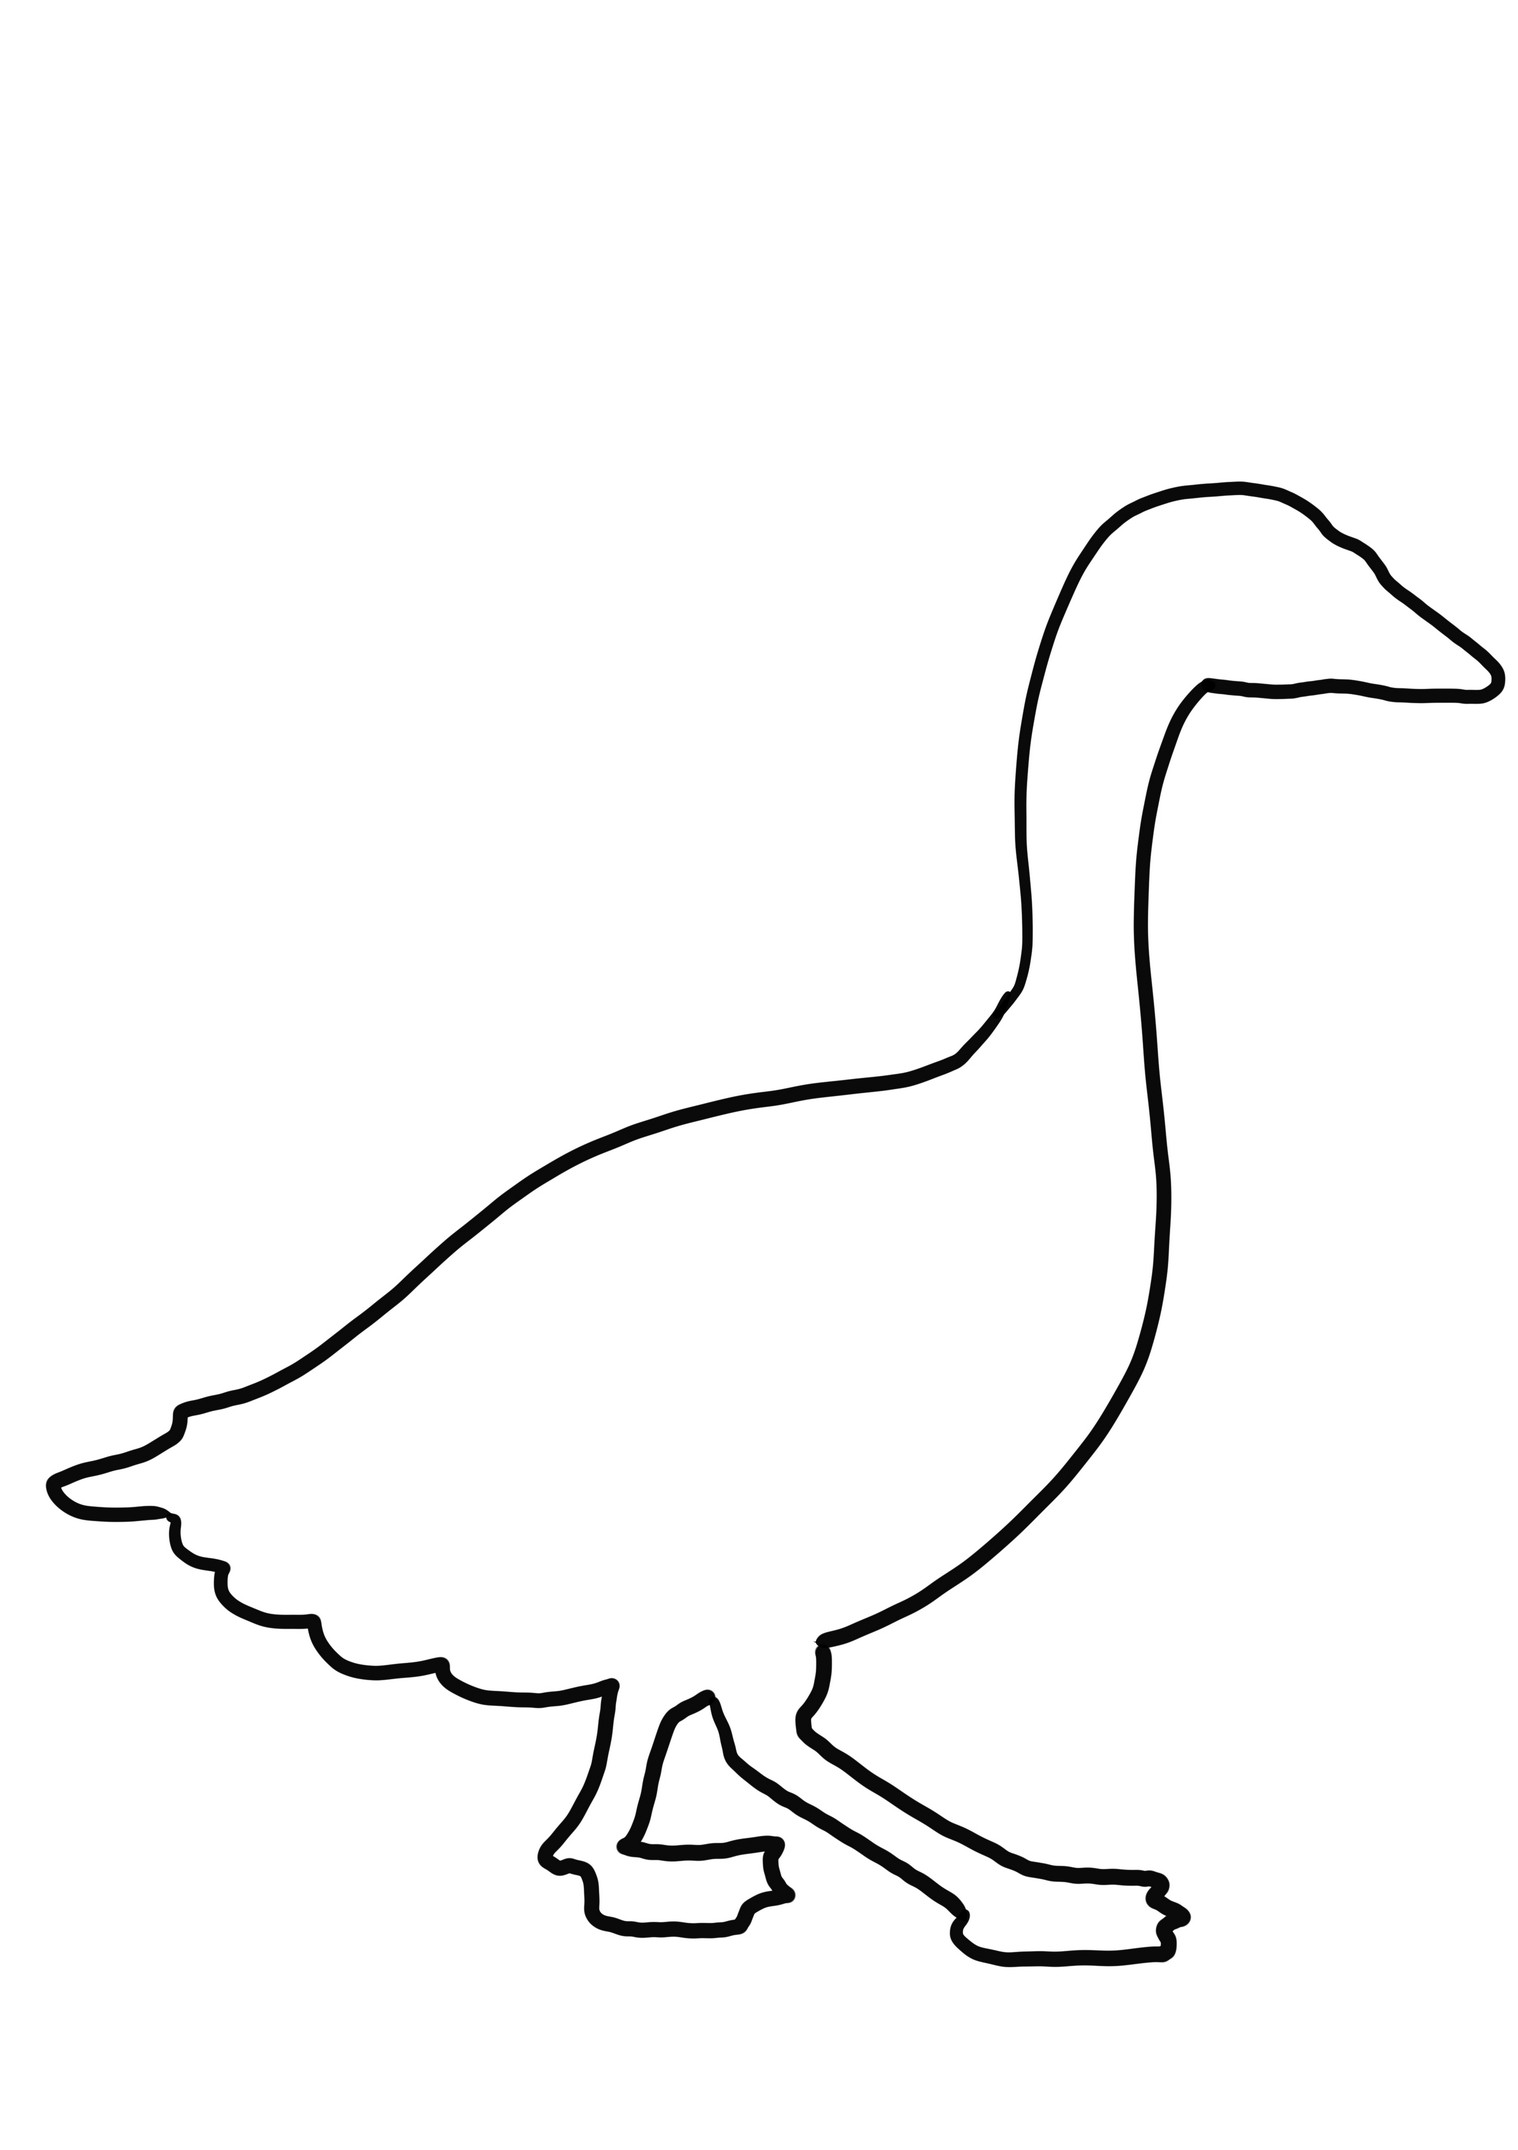 Goose silhouette coloring page